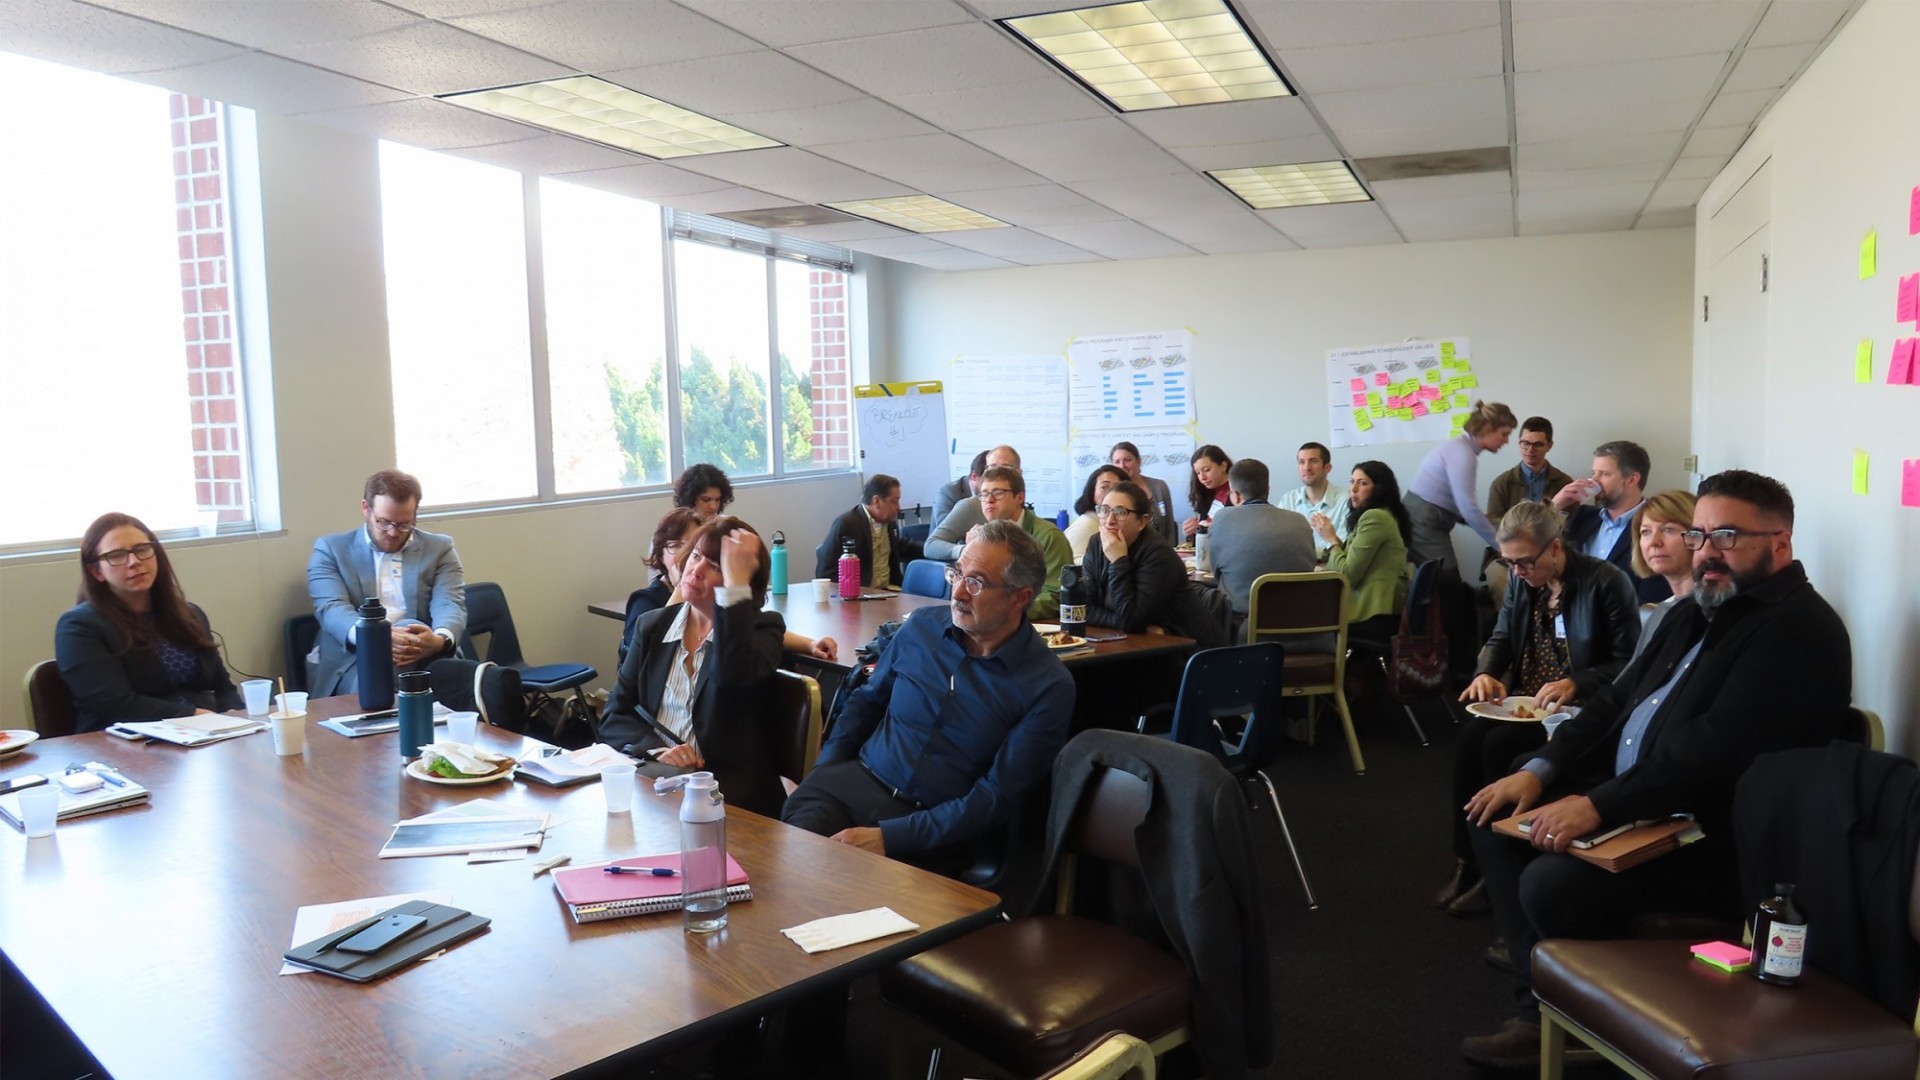 Workshop participants at the Los Angeles Resilience Accelerator